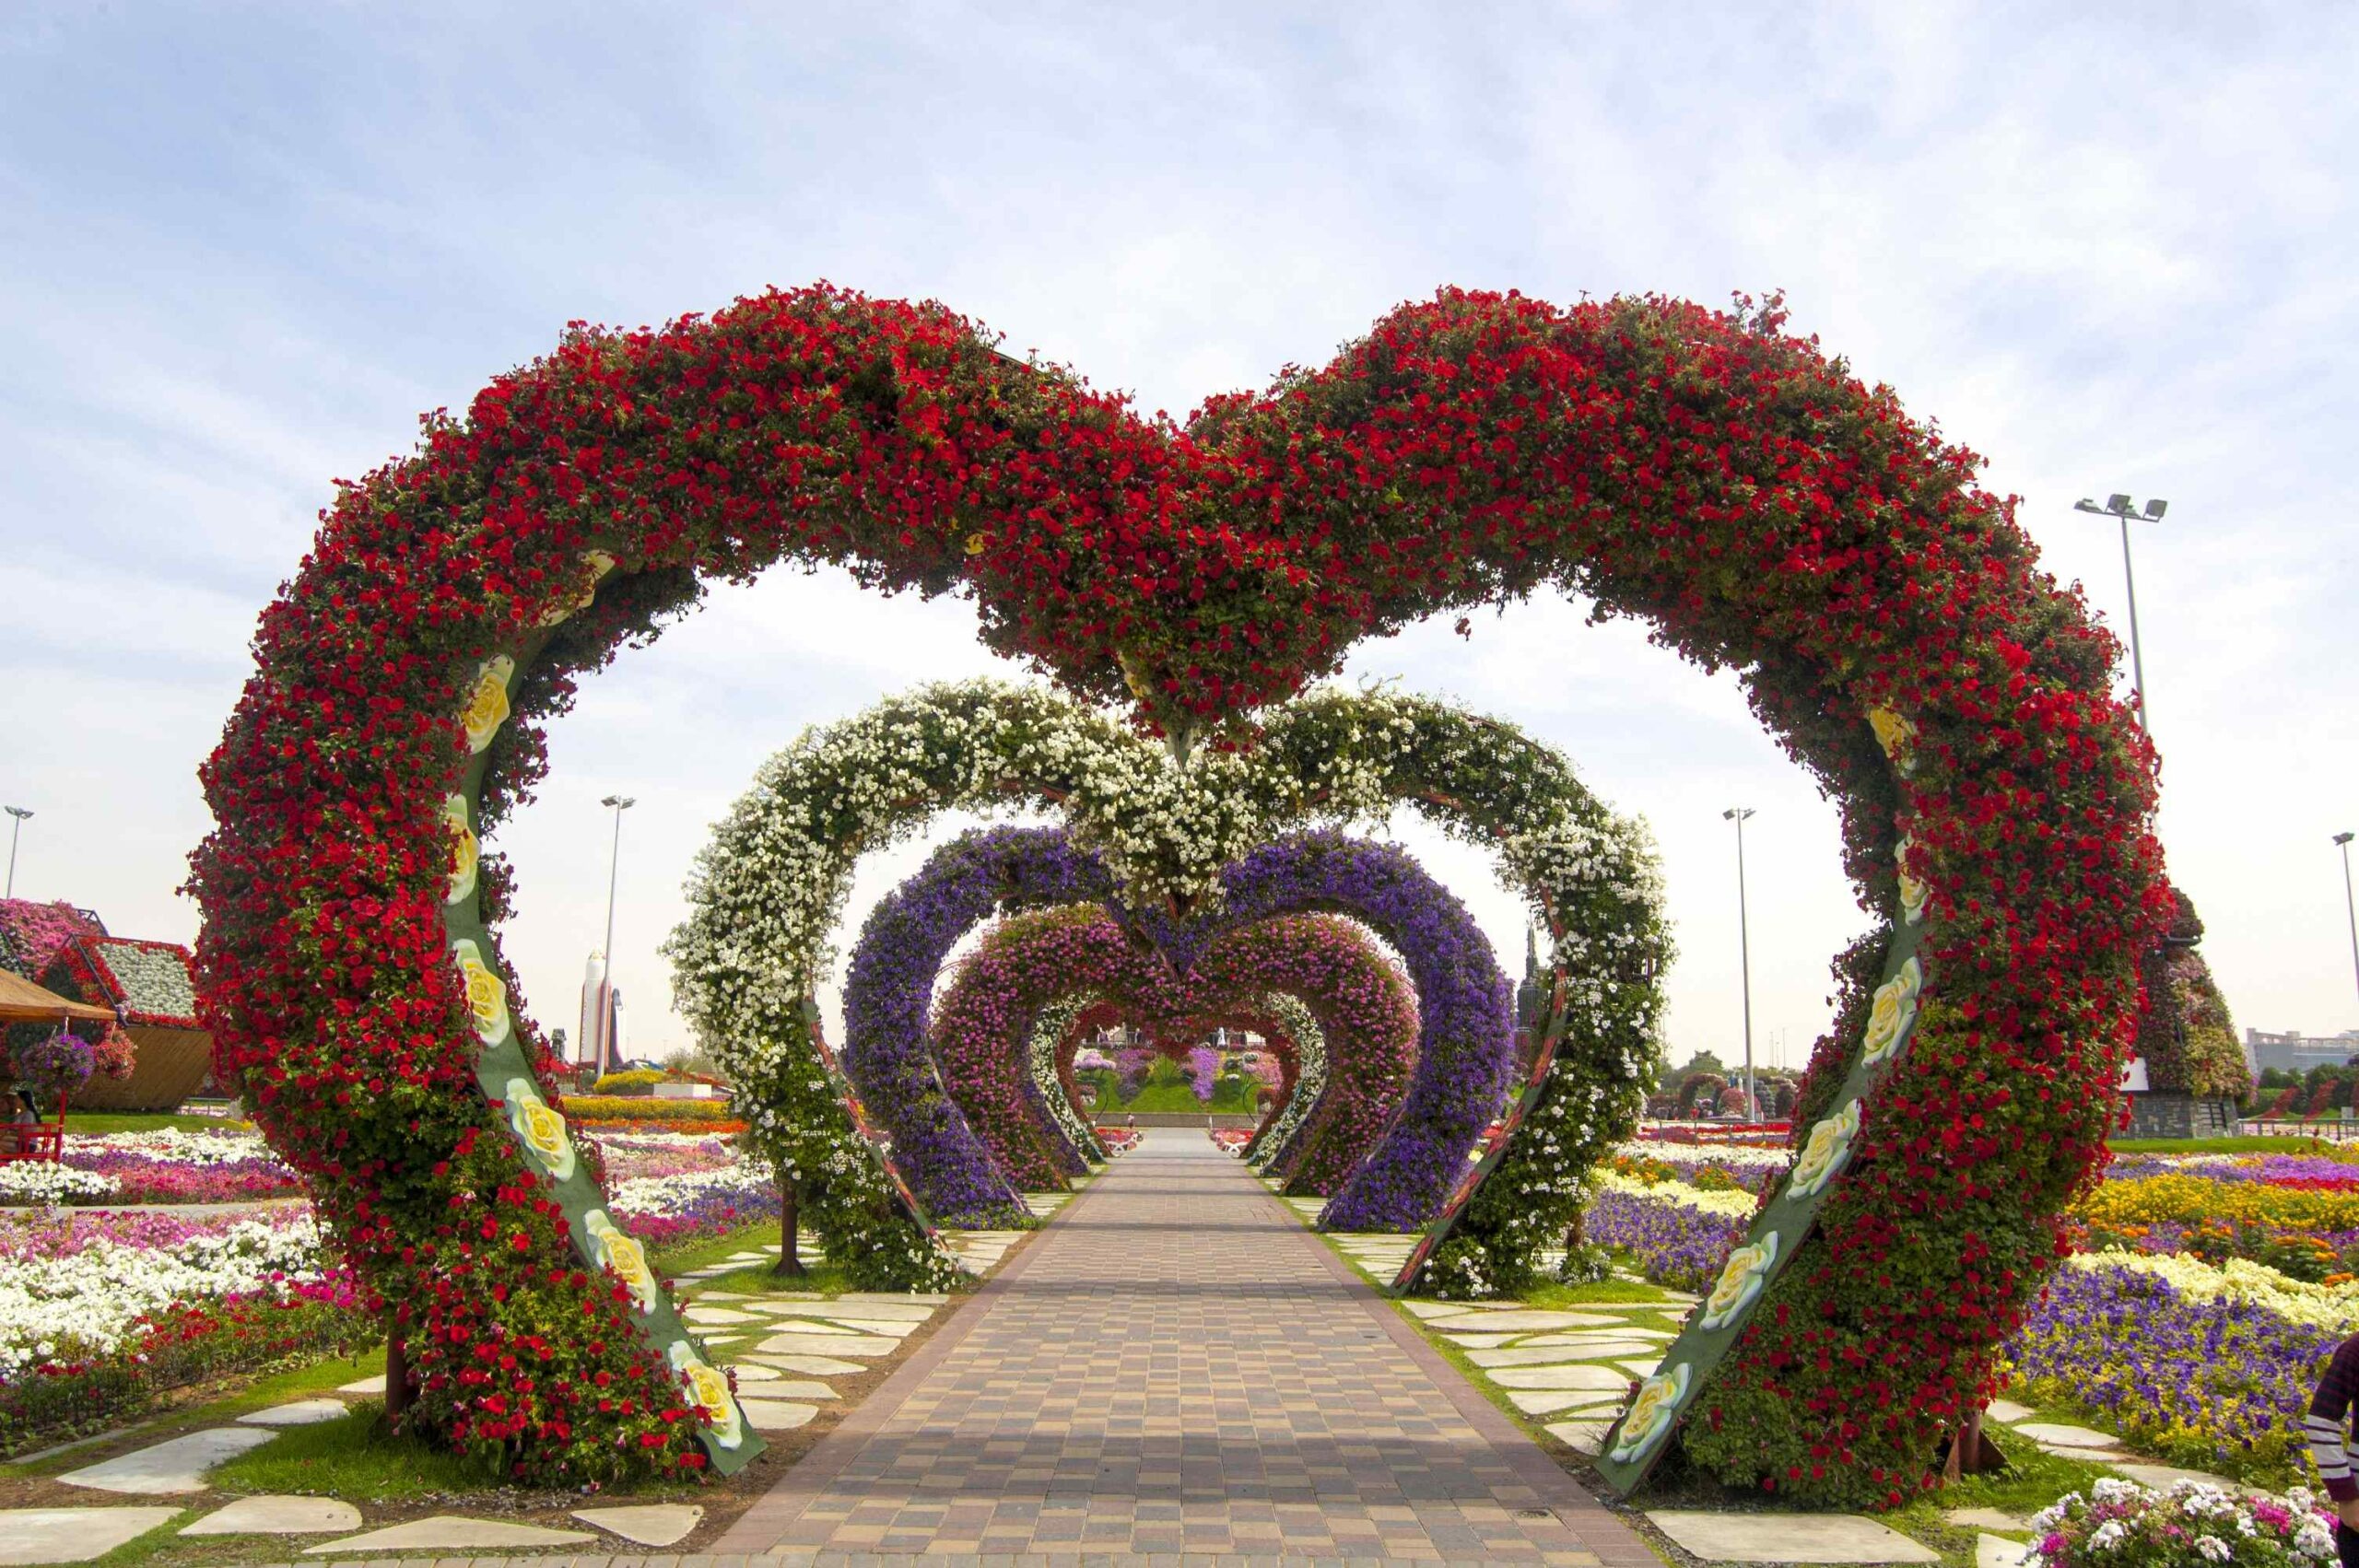 Witness the team's craftsmanship in the vibrant 3D floral characters at the region's beloved flower garden.